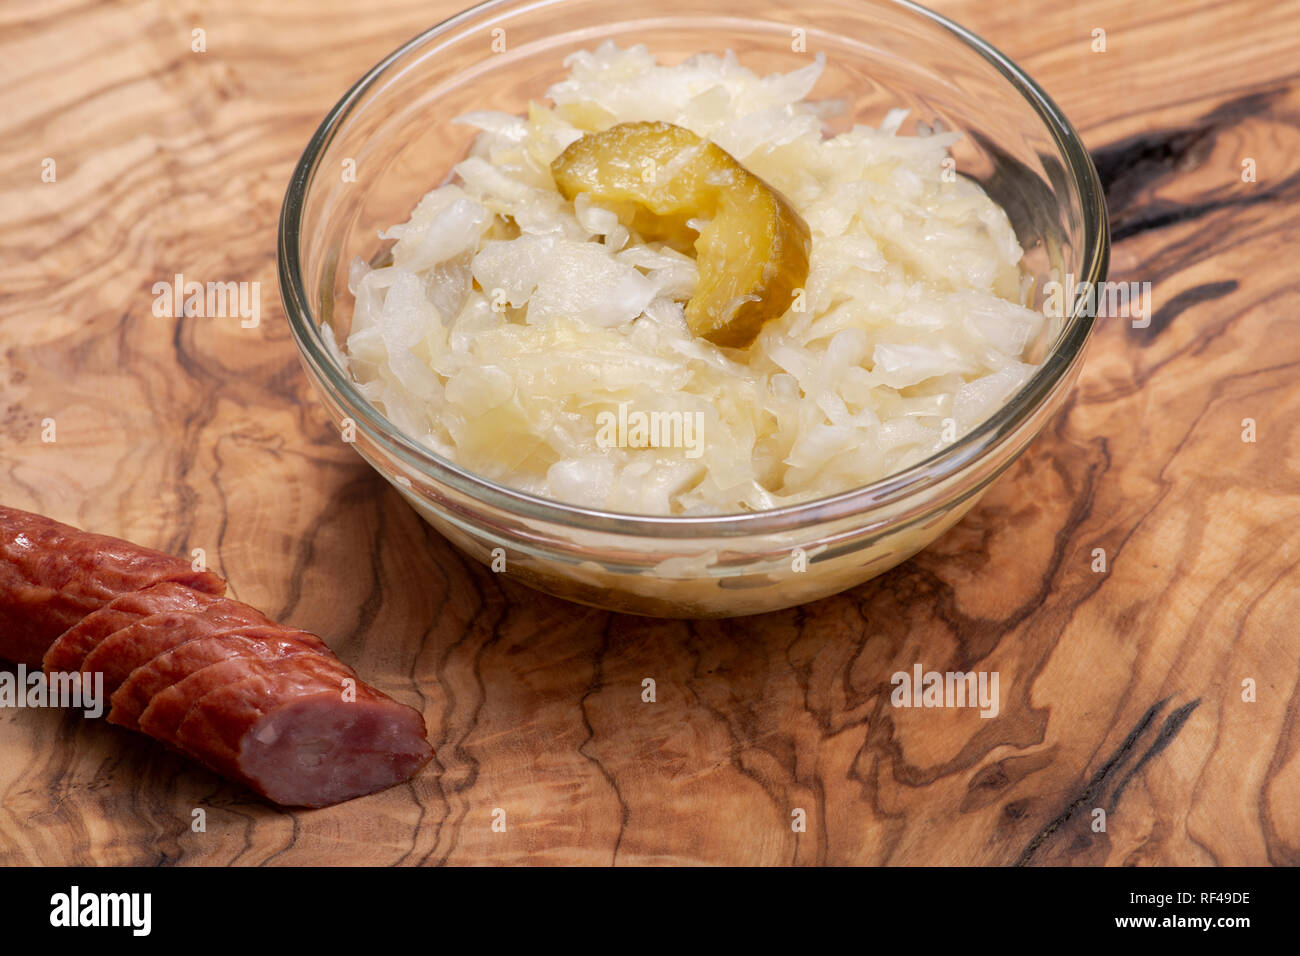 Traditional organic raw and fermented sauerkraut with pickled Persian cucumbers and grass fed beef smoked sausage stick Stock Photo